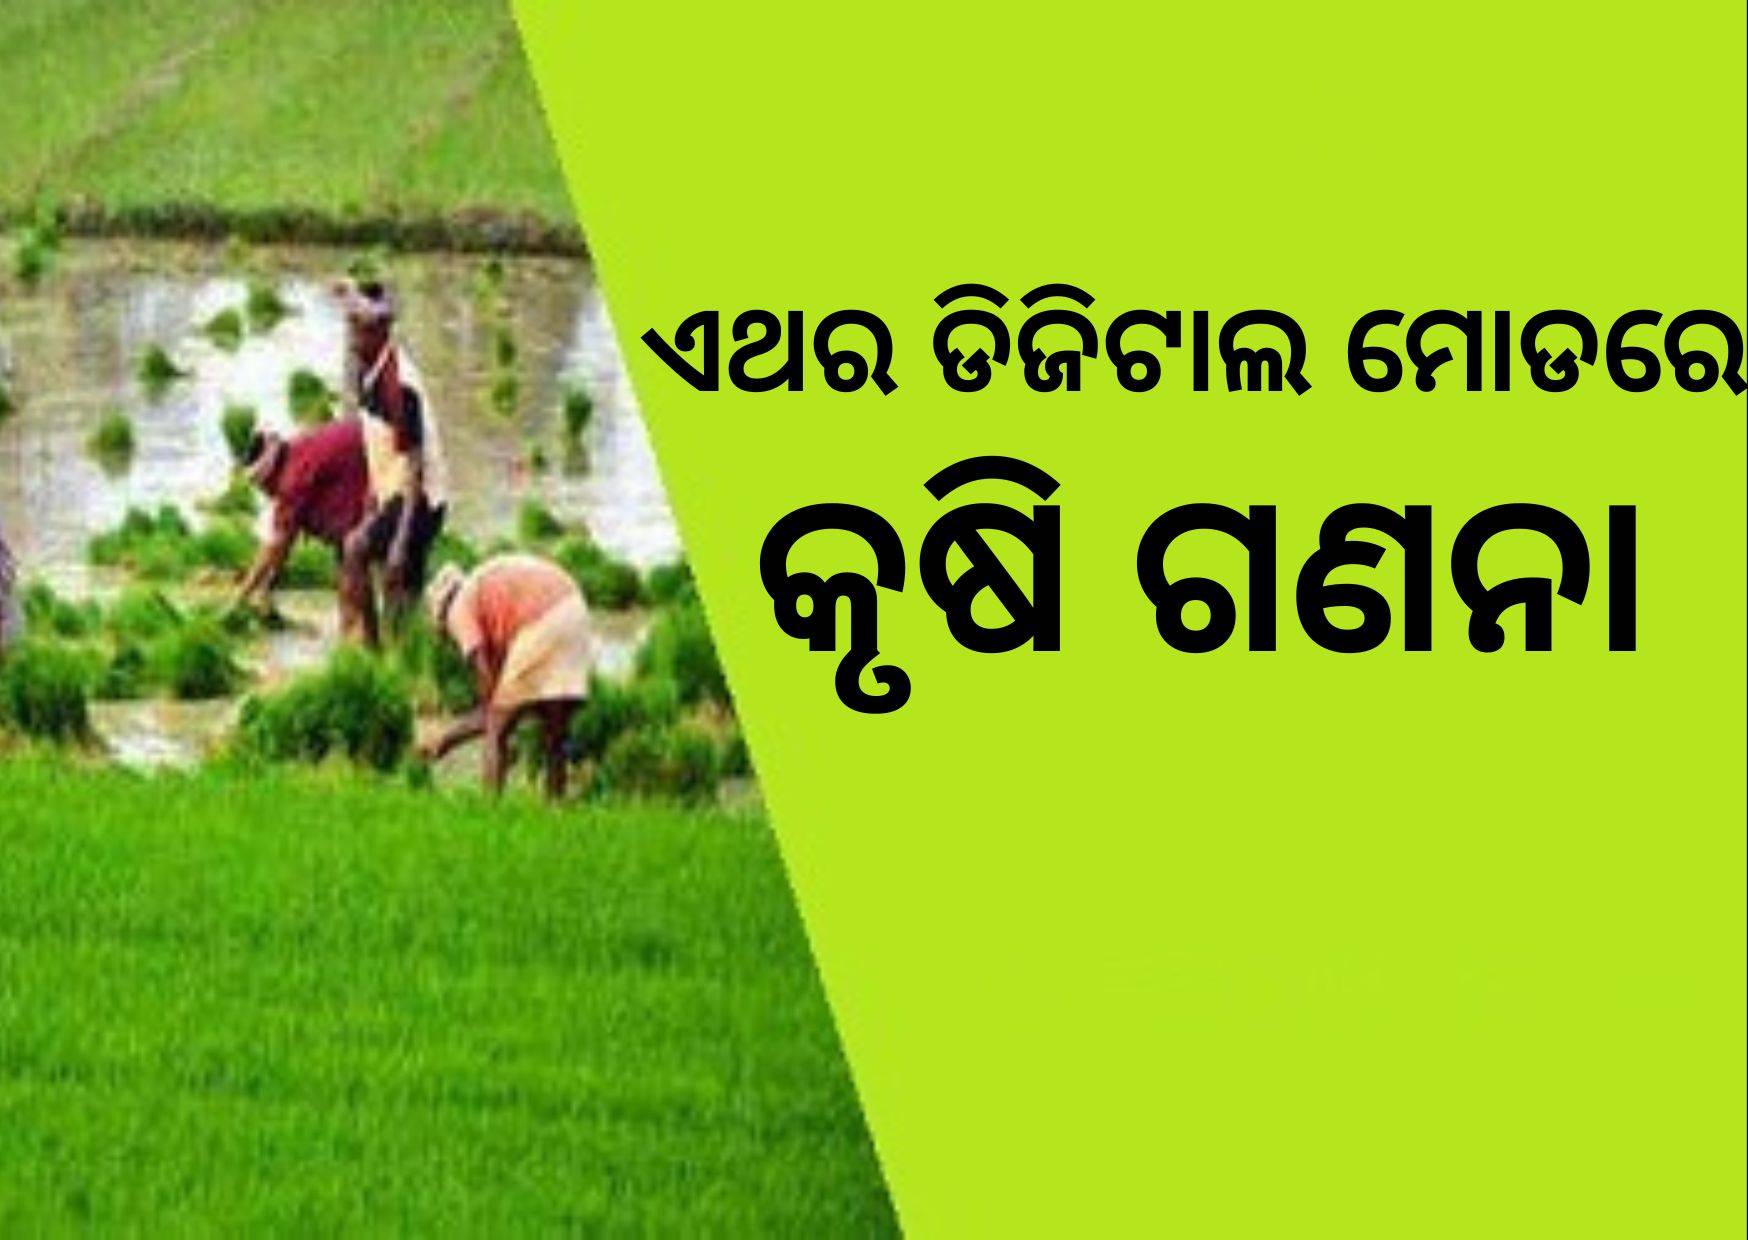 Union Minister of Agriculture and Farmers Welfare launches the 11th Agriculture Census in the country